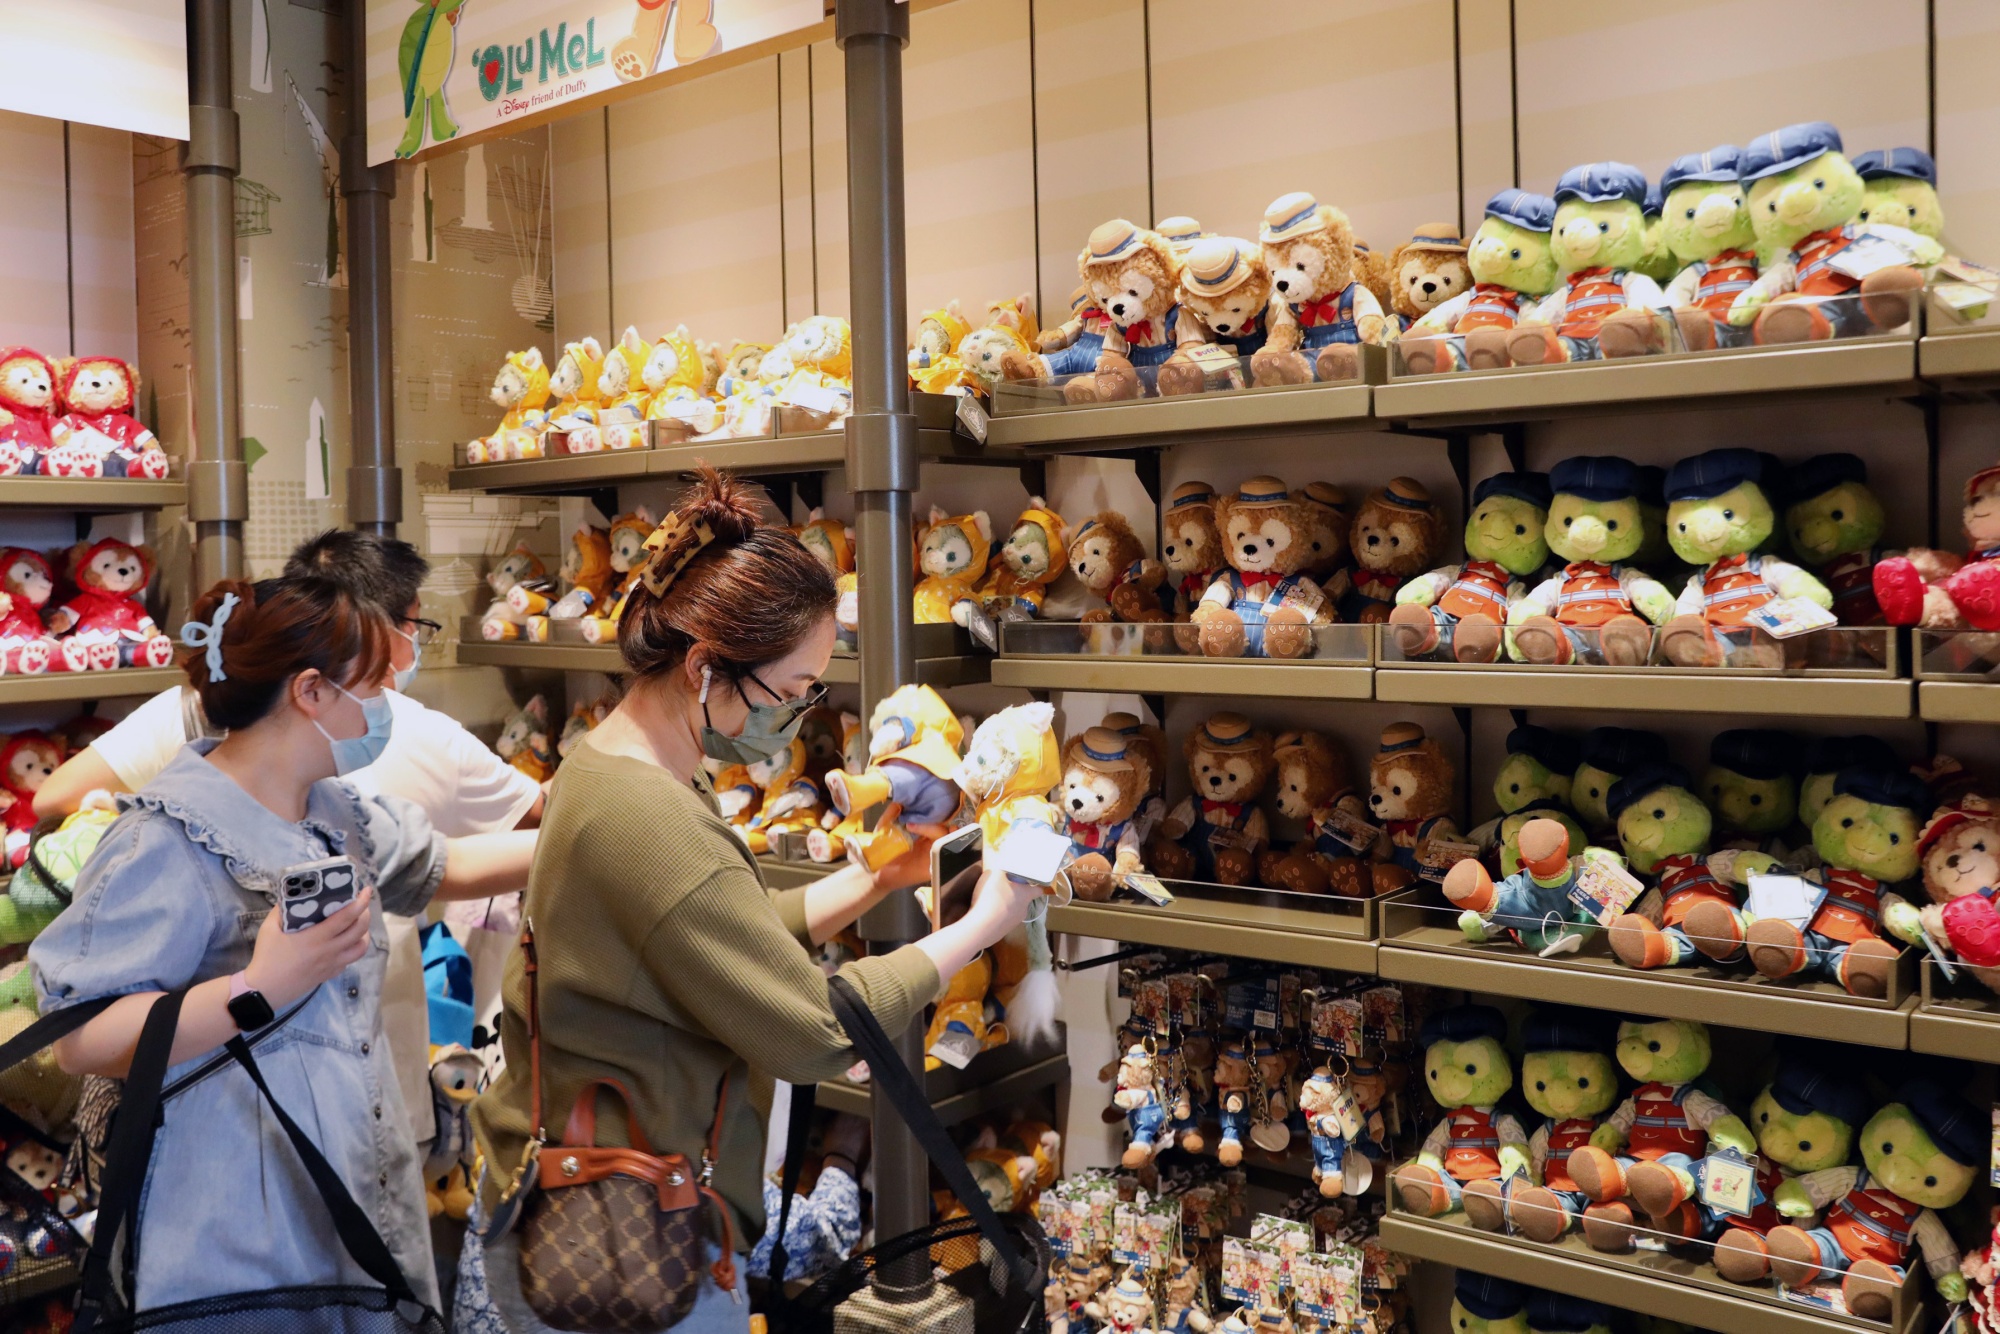 Why Is Inflation Rising Right Now? A Stuffed Toy Shows Why